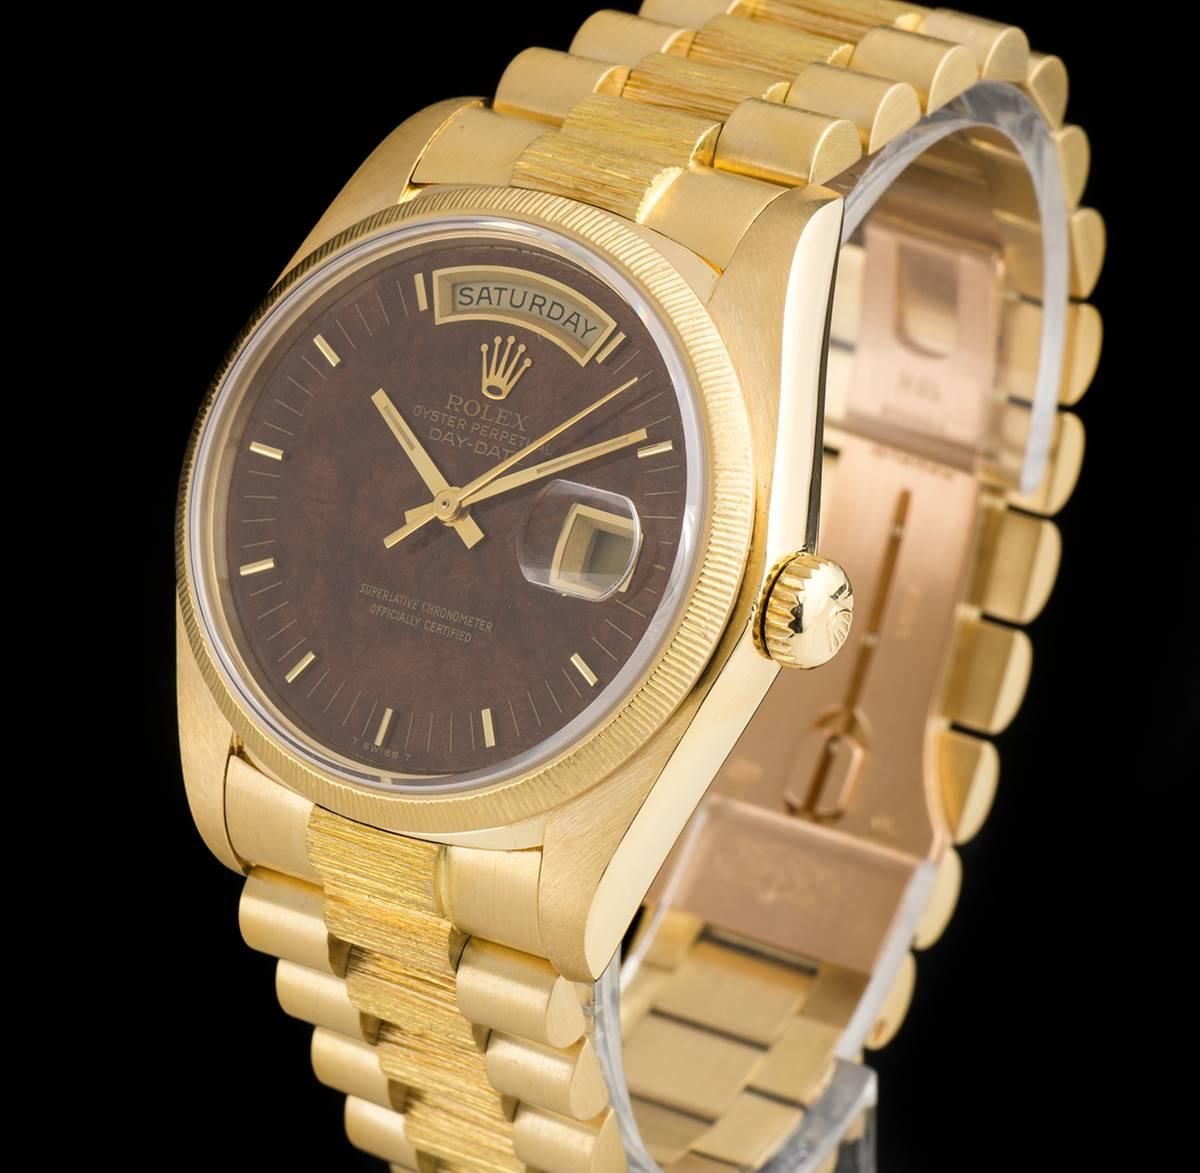 A Rare 18k Yellow Gold Oyster Perpetual Day-Date Gents Wristwatch, rare wood dial with applied hour markers, day aperture at 12 0'clock, date at 3 0'clock, a fixed 18k yellow gold bark finish bezel, an 18k yellow gold president bracelet with bark